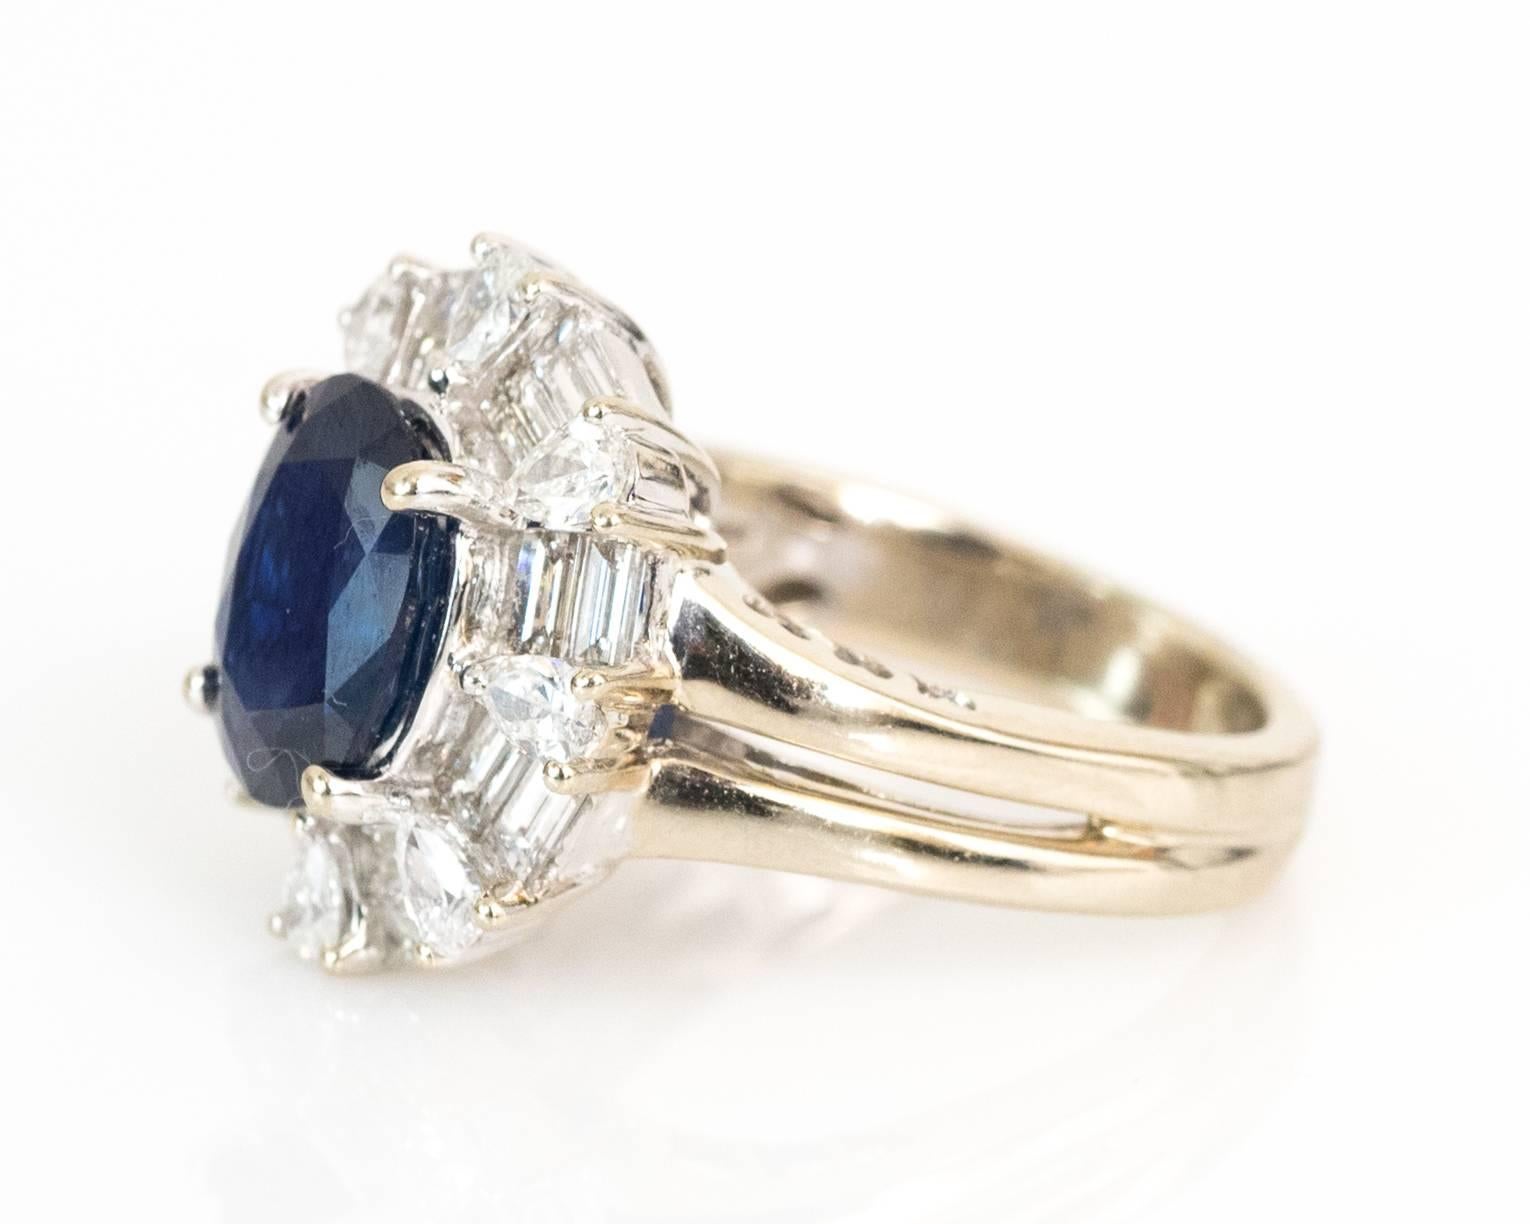 Women's 1970s GIA Certified 2.0 carat Sapphire, Diamond and 14k White Gold Ring